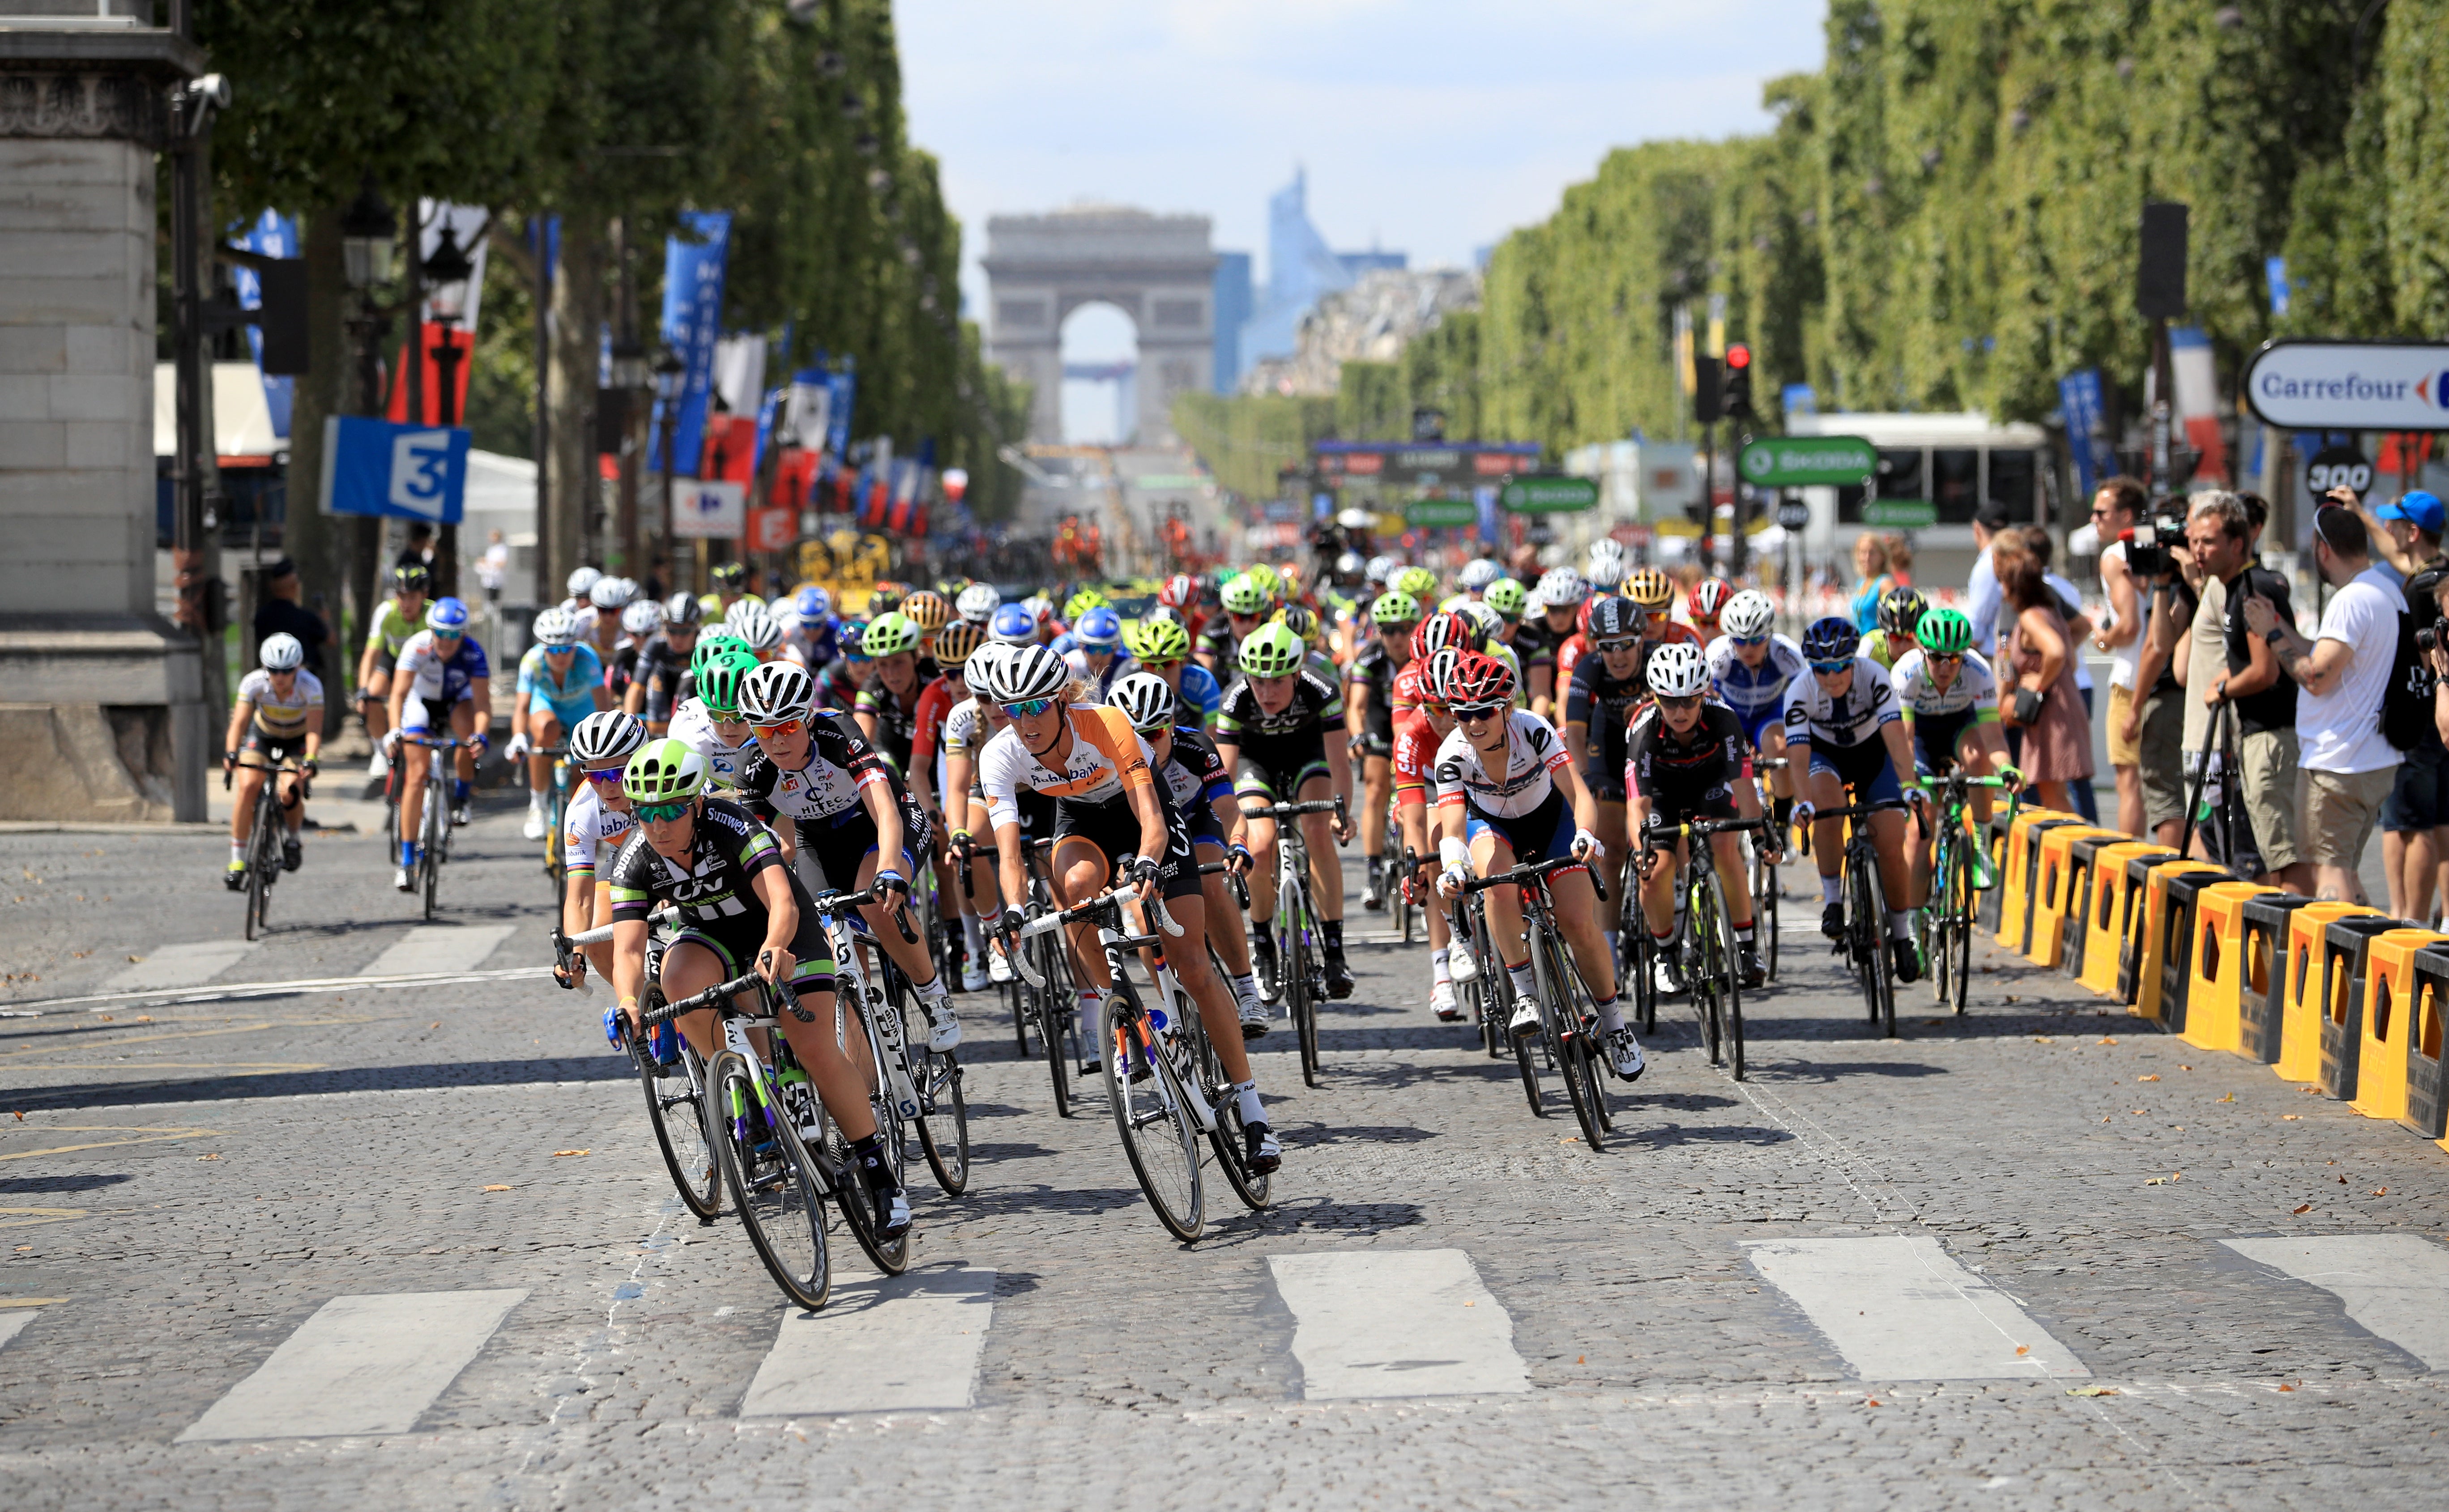 Tour de France Femmes hailed as big moment for cycling The Independent